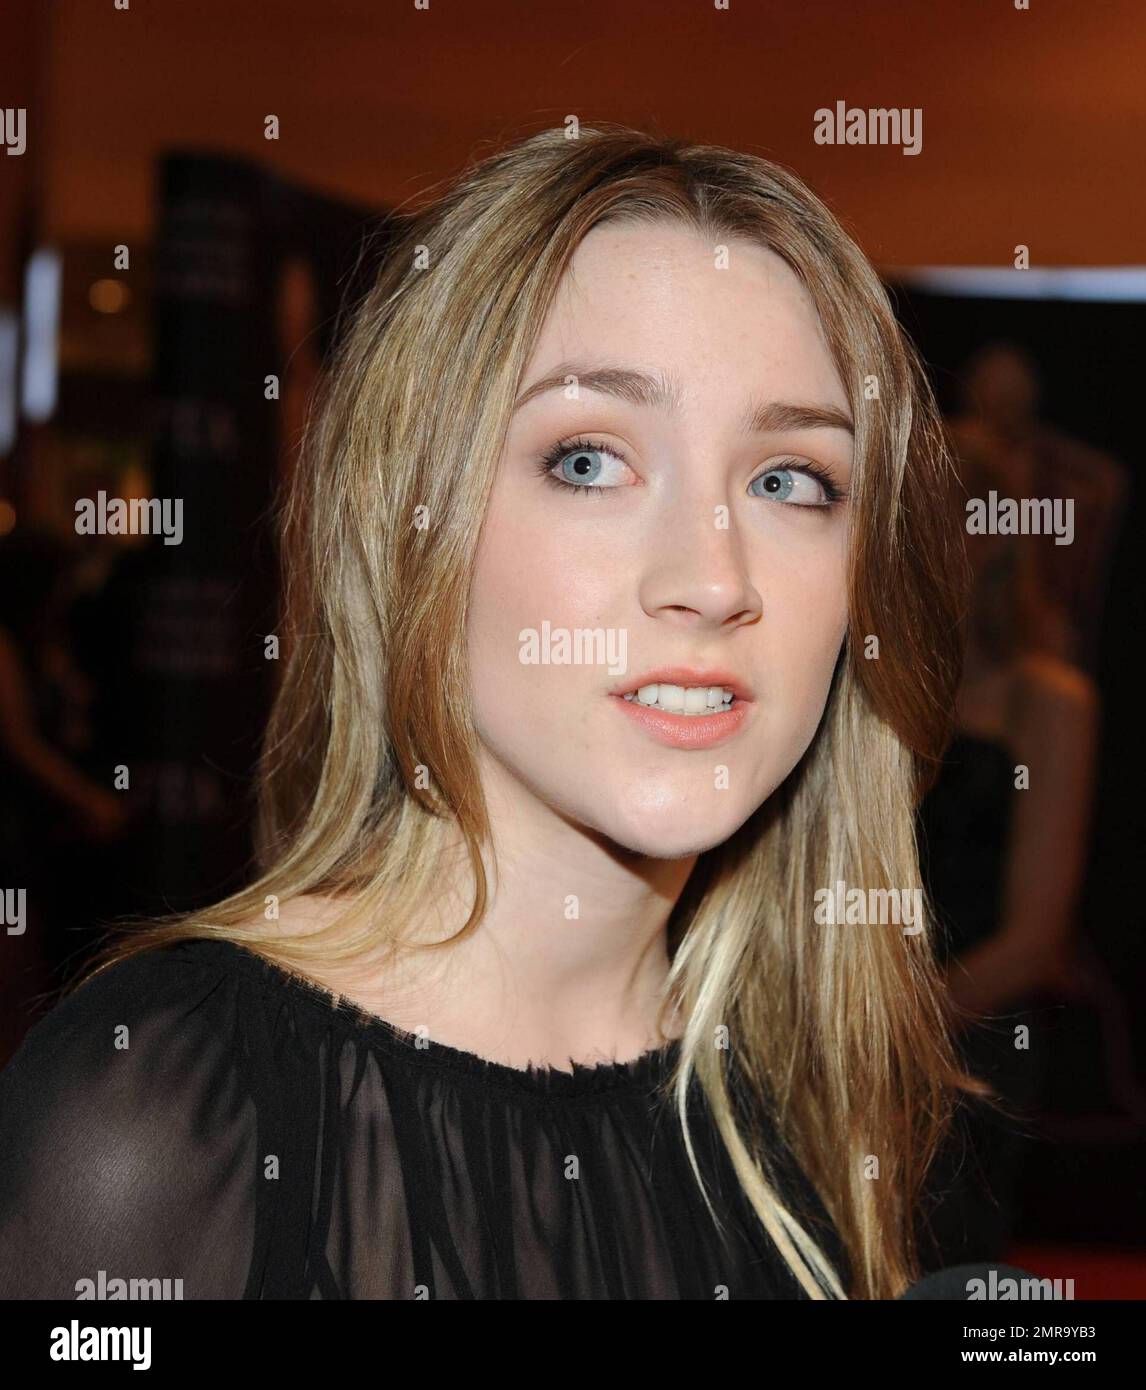 Elegant yet still a feisty teen, actress Saoirse Ronan, 16, makes a funny  face and wears colorful bracelets with her sophisticated black gown on the  red carpet at the 8th Annual Irish